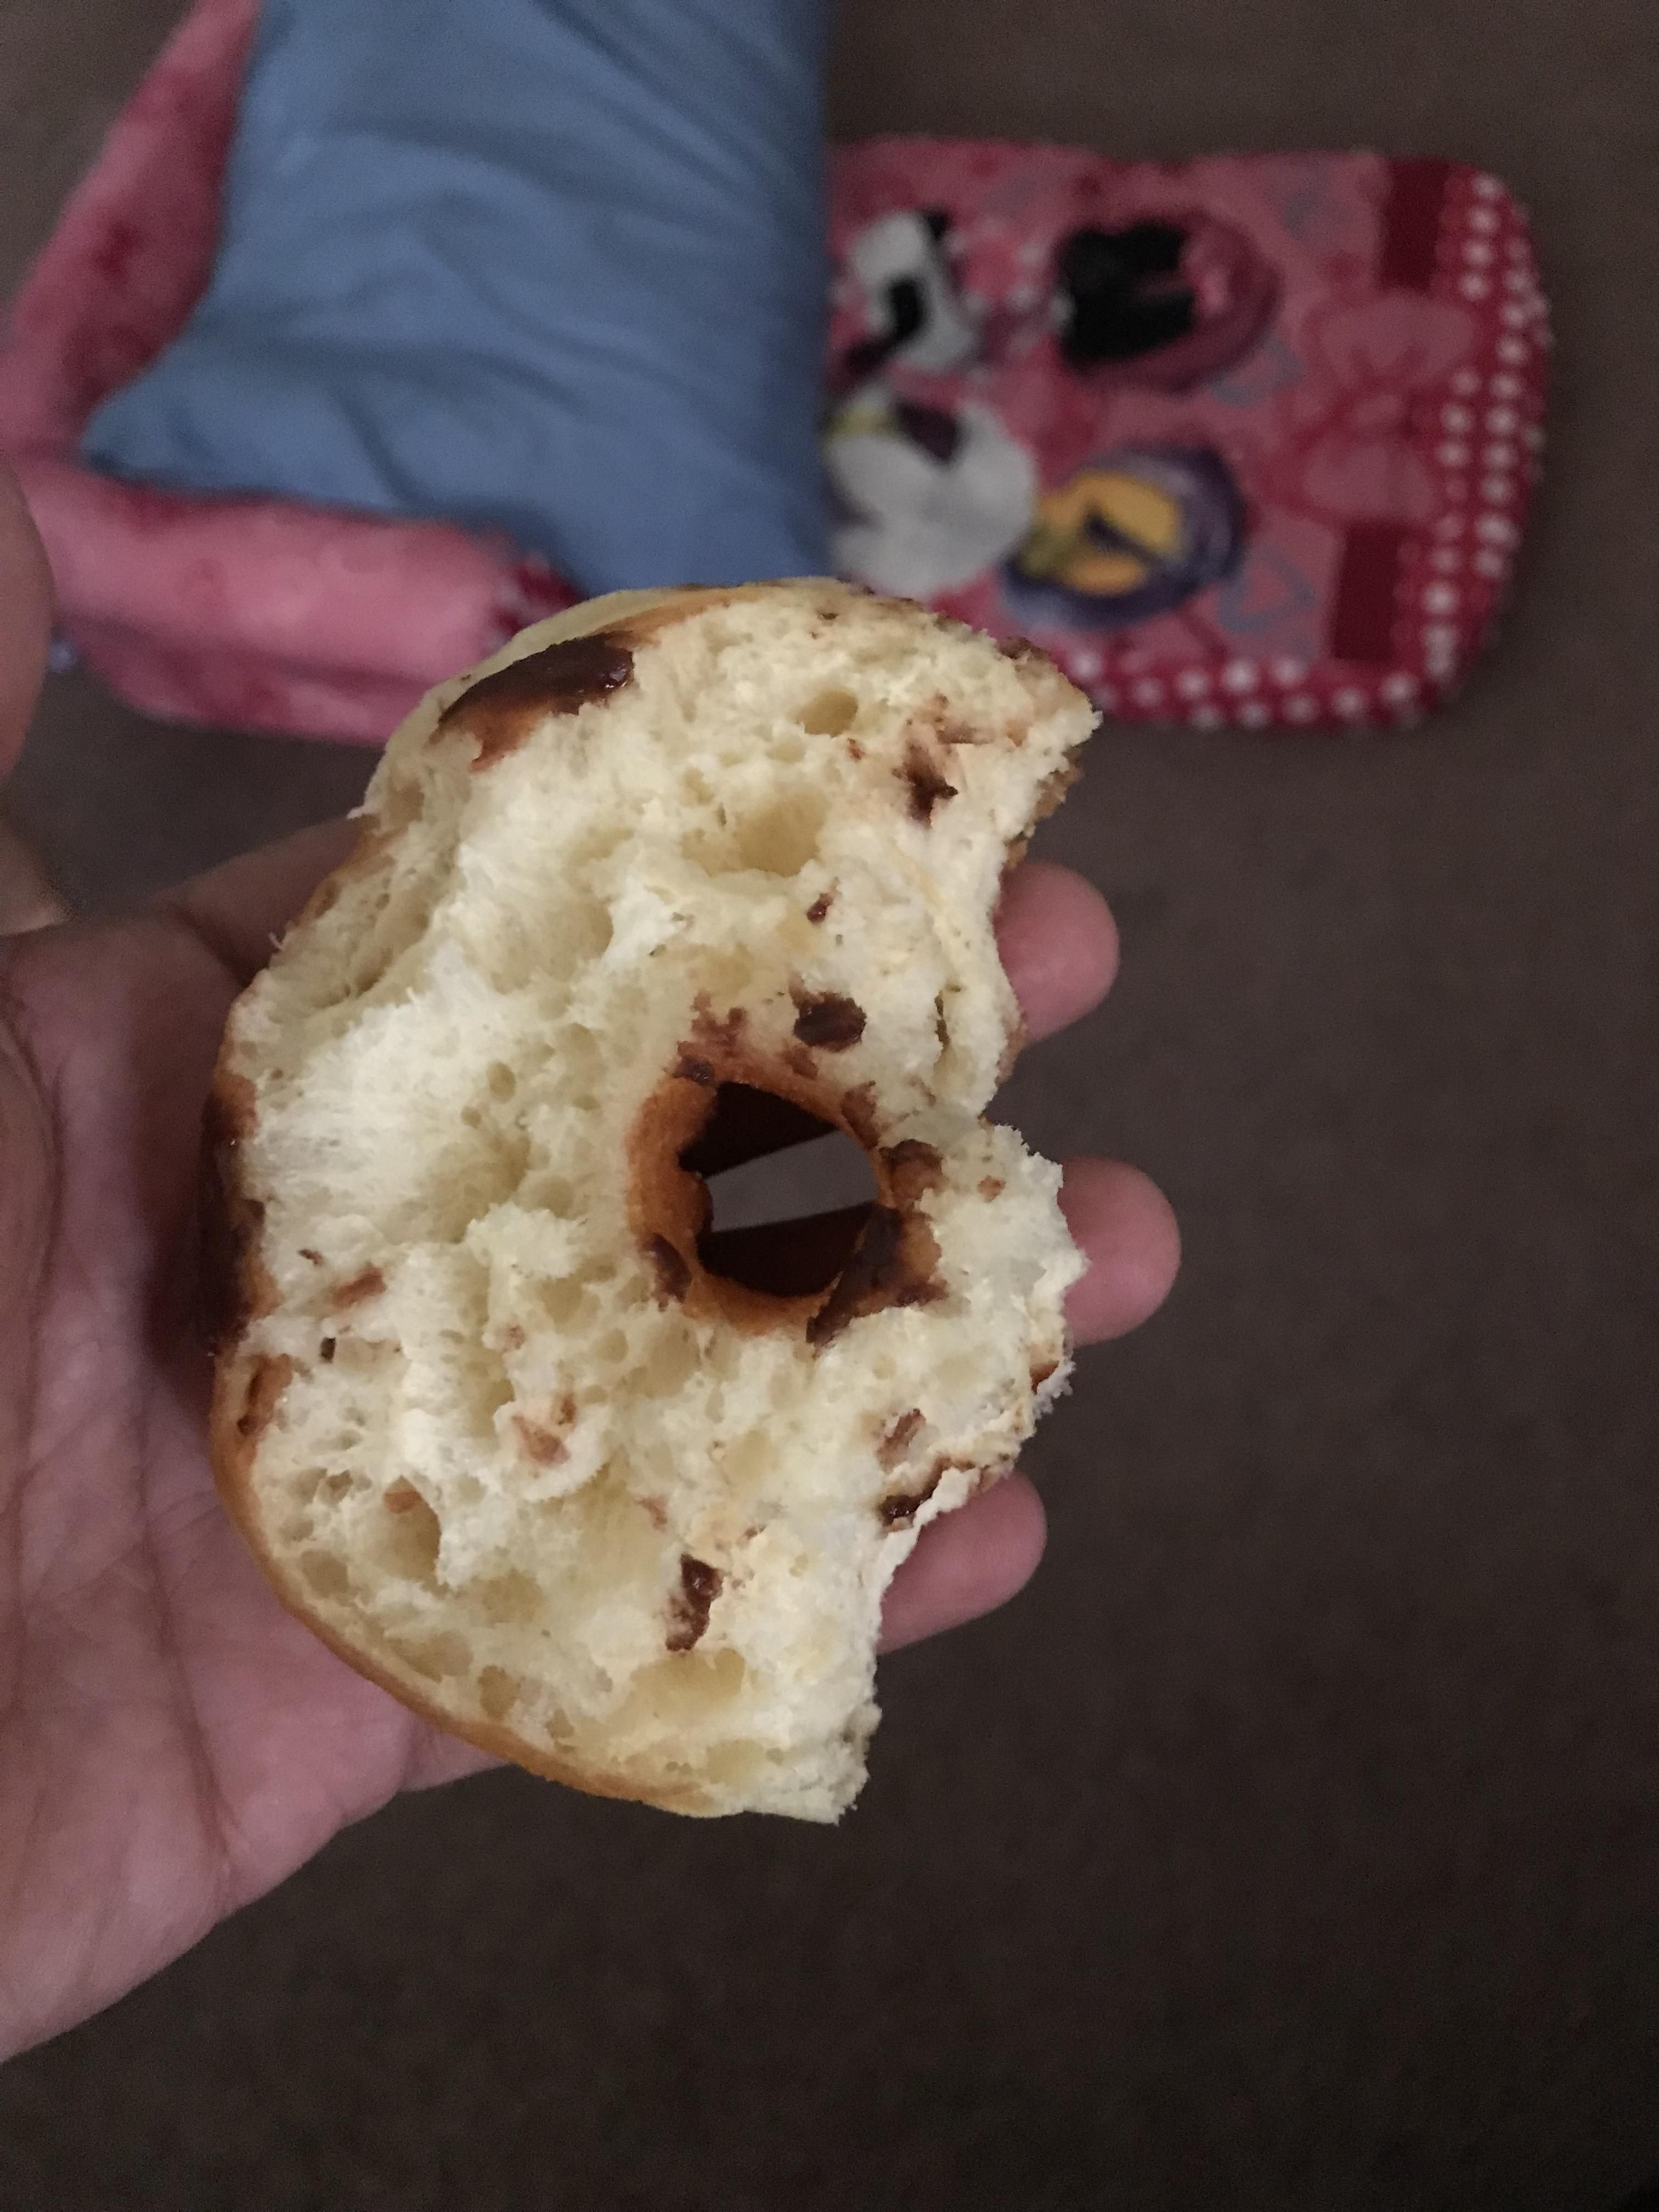 Told my daughter she could have a chocolate donut, but she has to give me half. I need to be more specific next time.